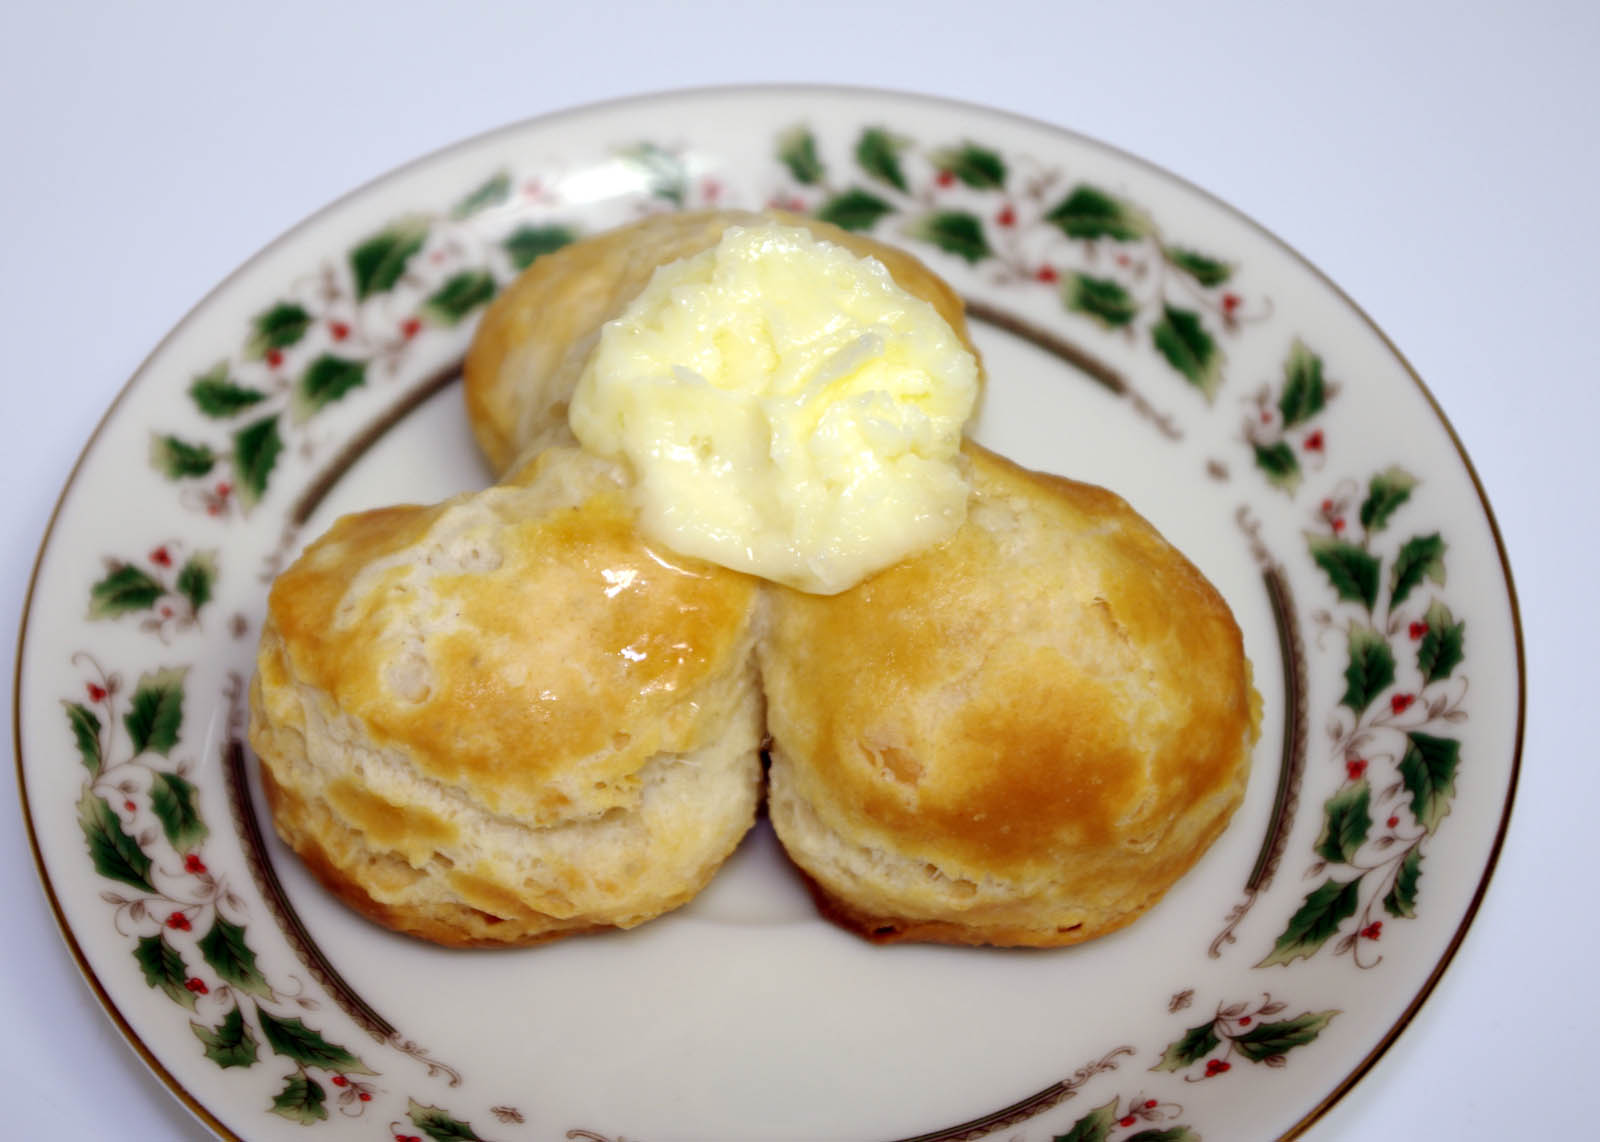 Butter on biscuits